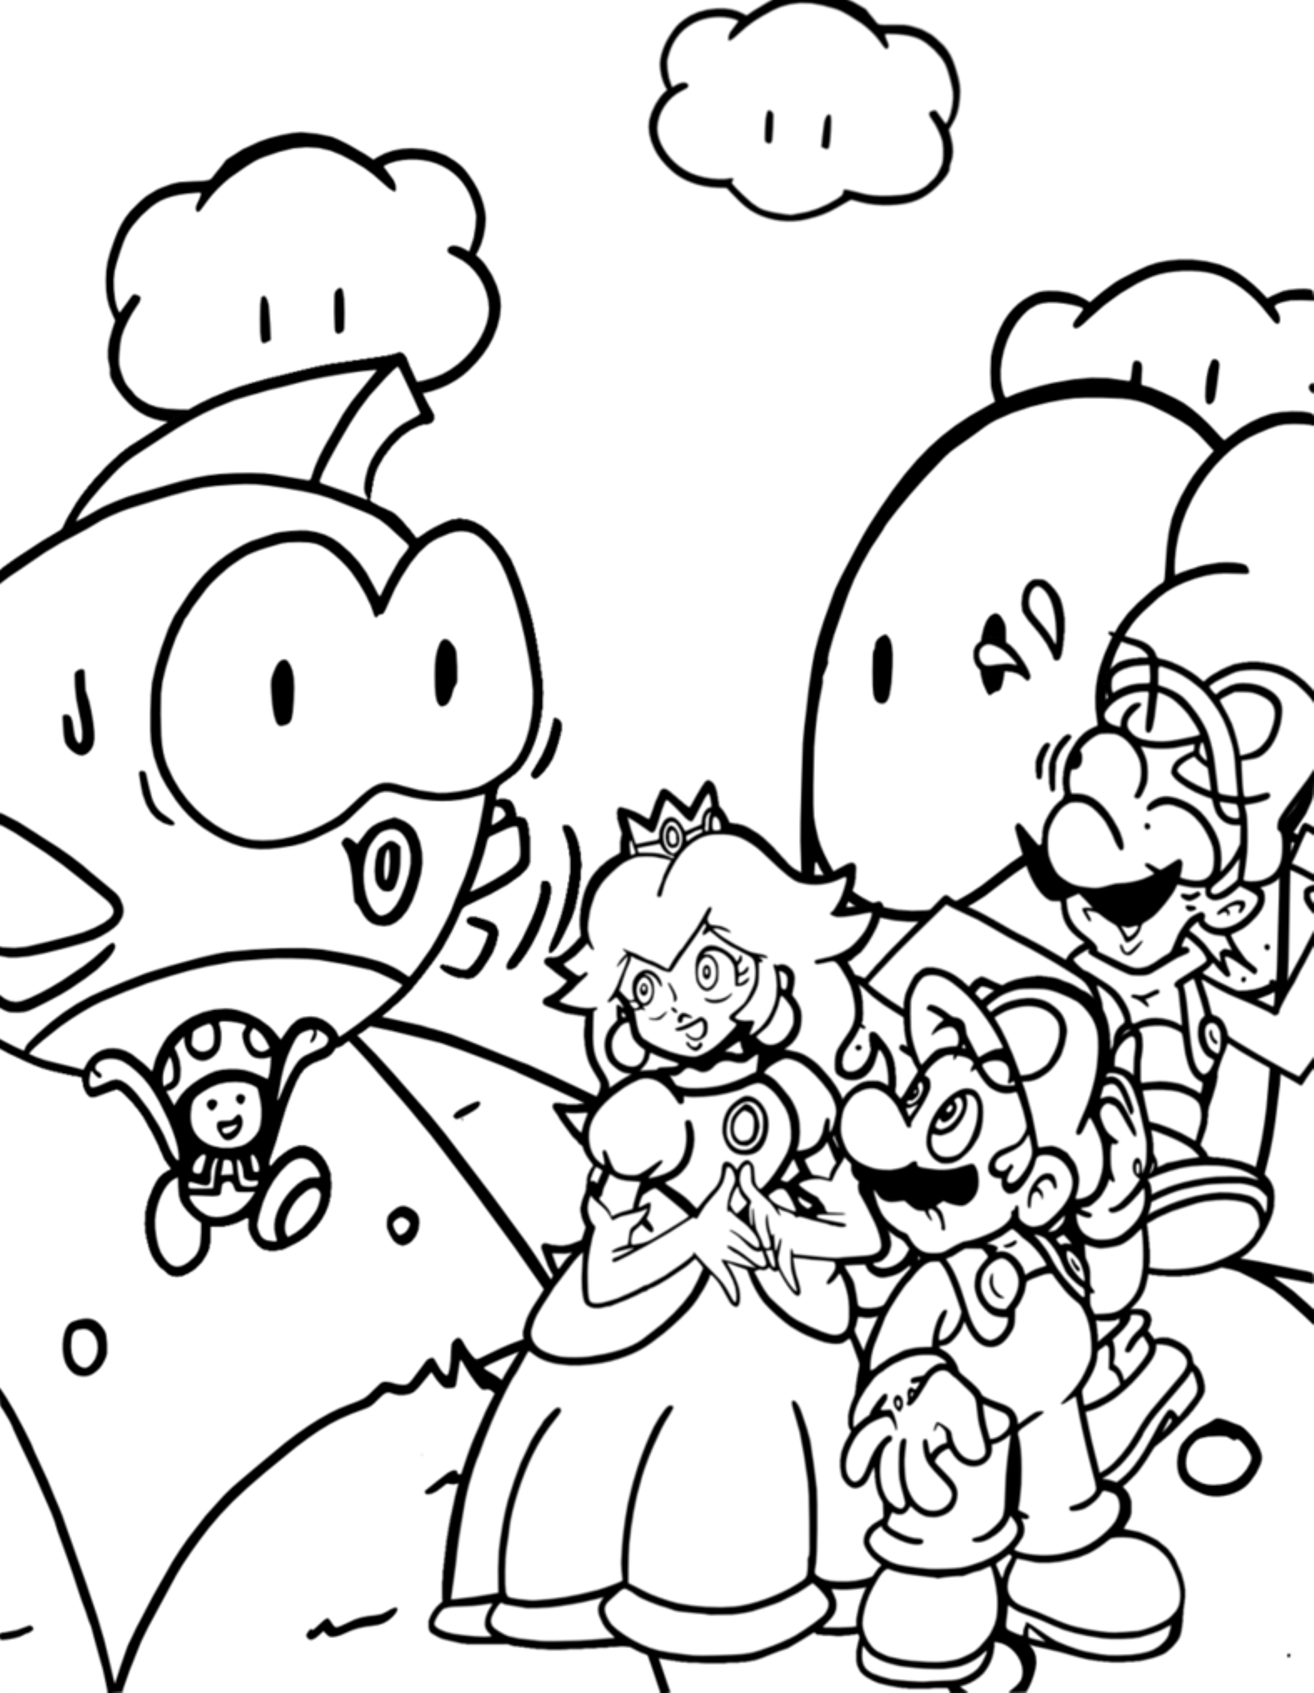 Free Mario Bros Coloring Pages | High Quality Coloring Pages